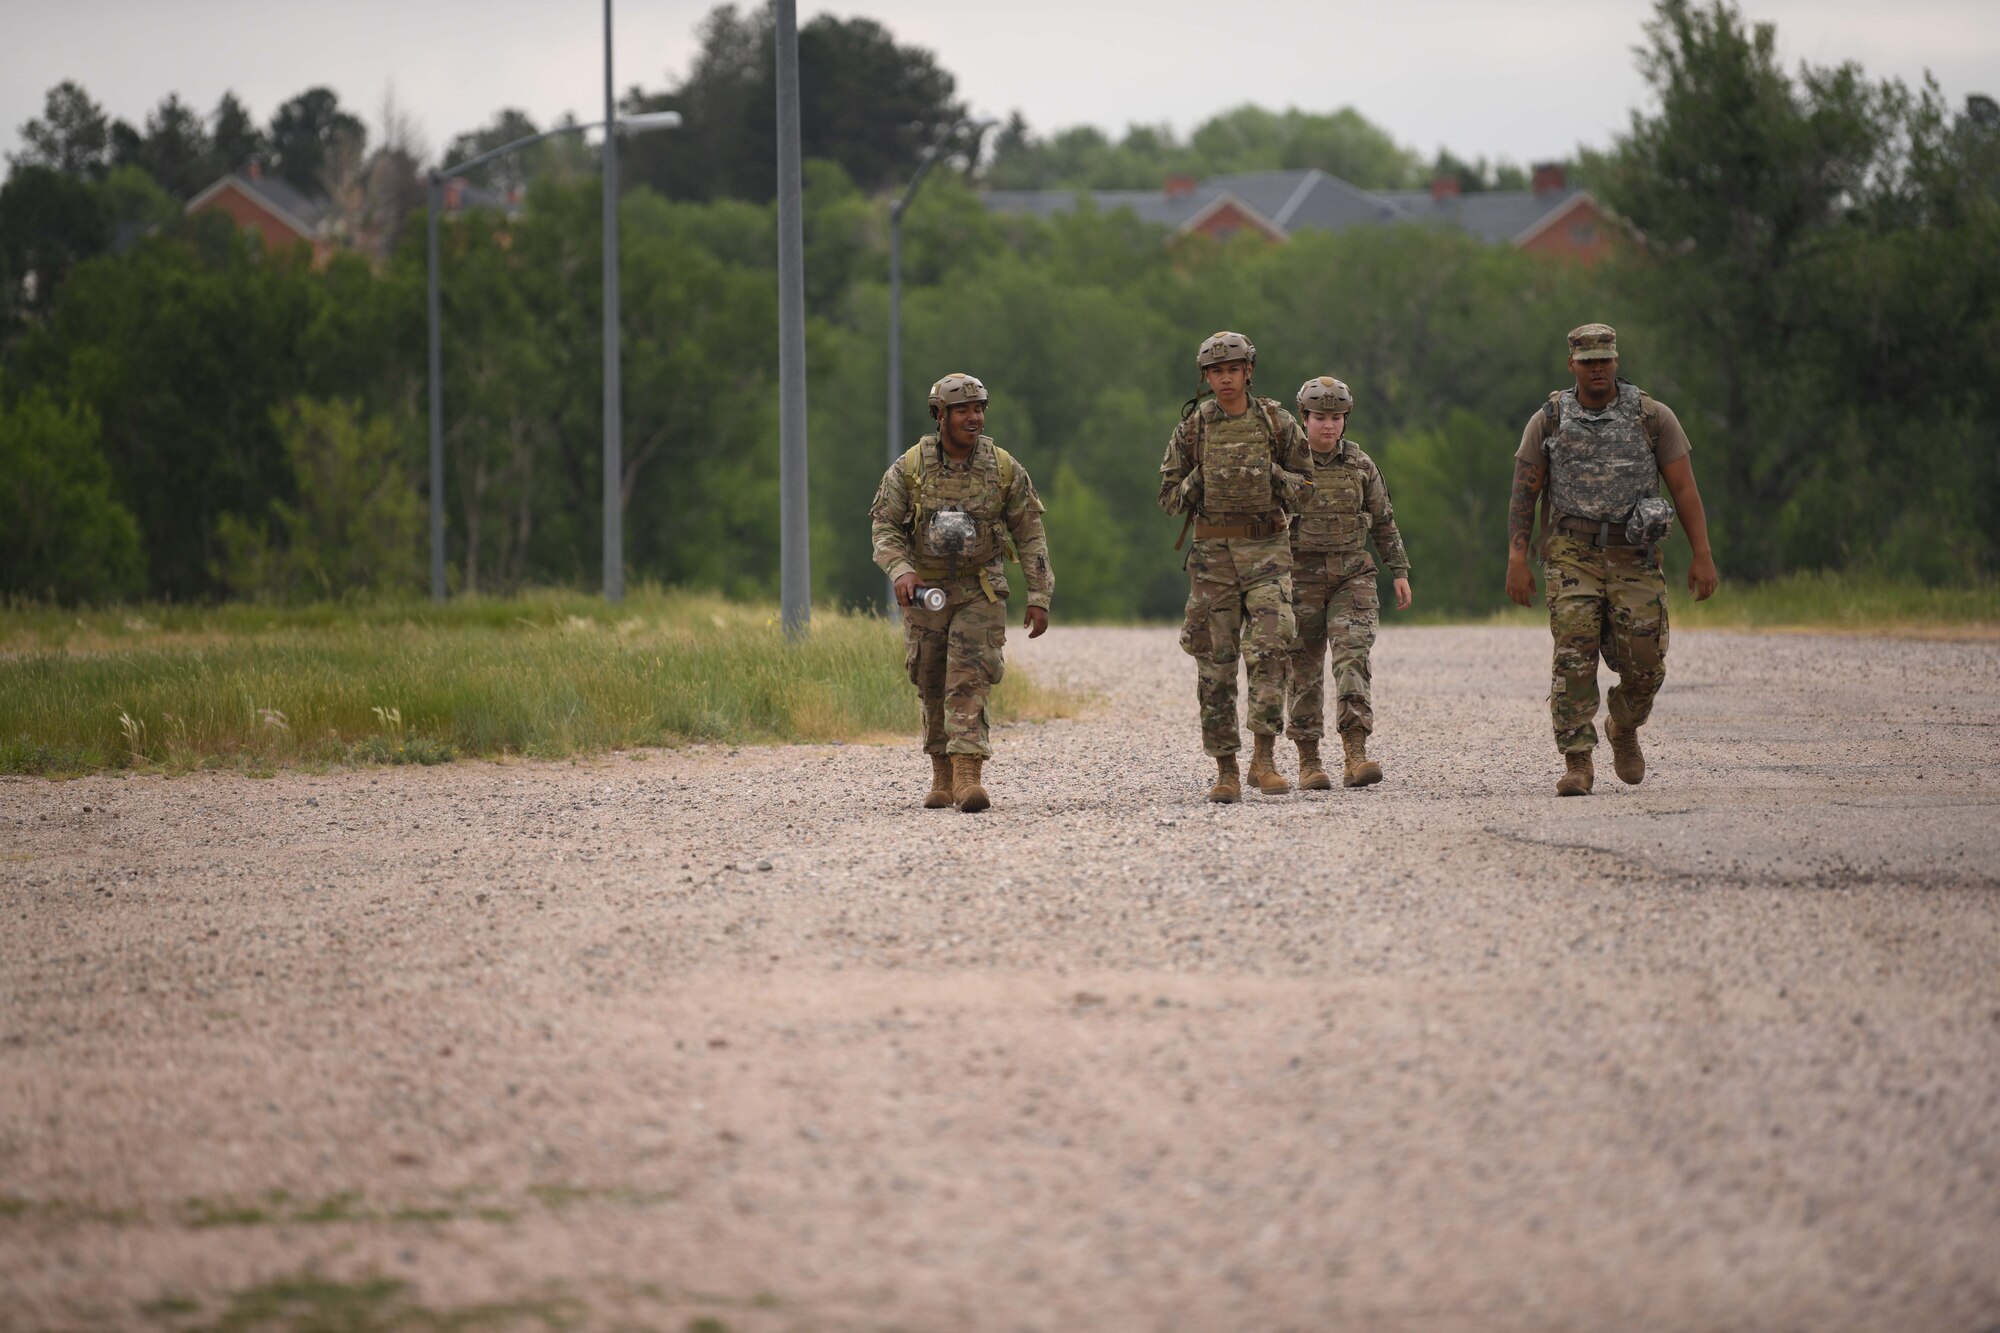 A group of Airmen participate in a ruck during the 90th Civil Engineering Squadron Readiness Challenge on F.E. Warren Air Force Base, Wyoming, July 1, 2021. The purpose of the exercise was to train the readiness capabilities of the Airmen with the 90 CES. (U.S. Air Force photo by Airman 1st Class Darius Frazier)